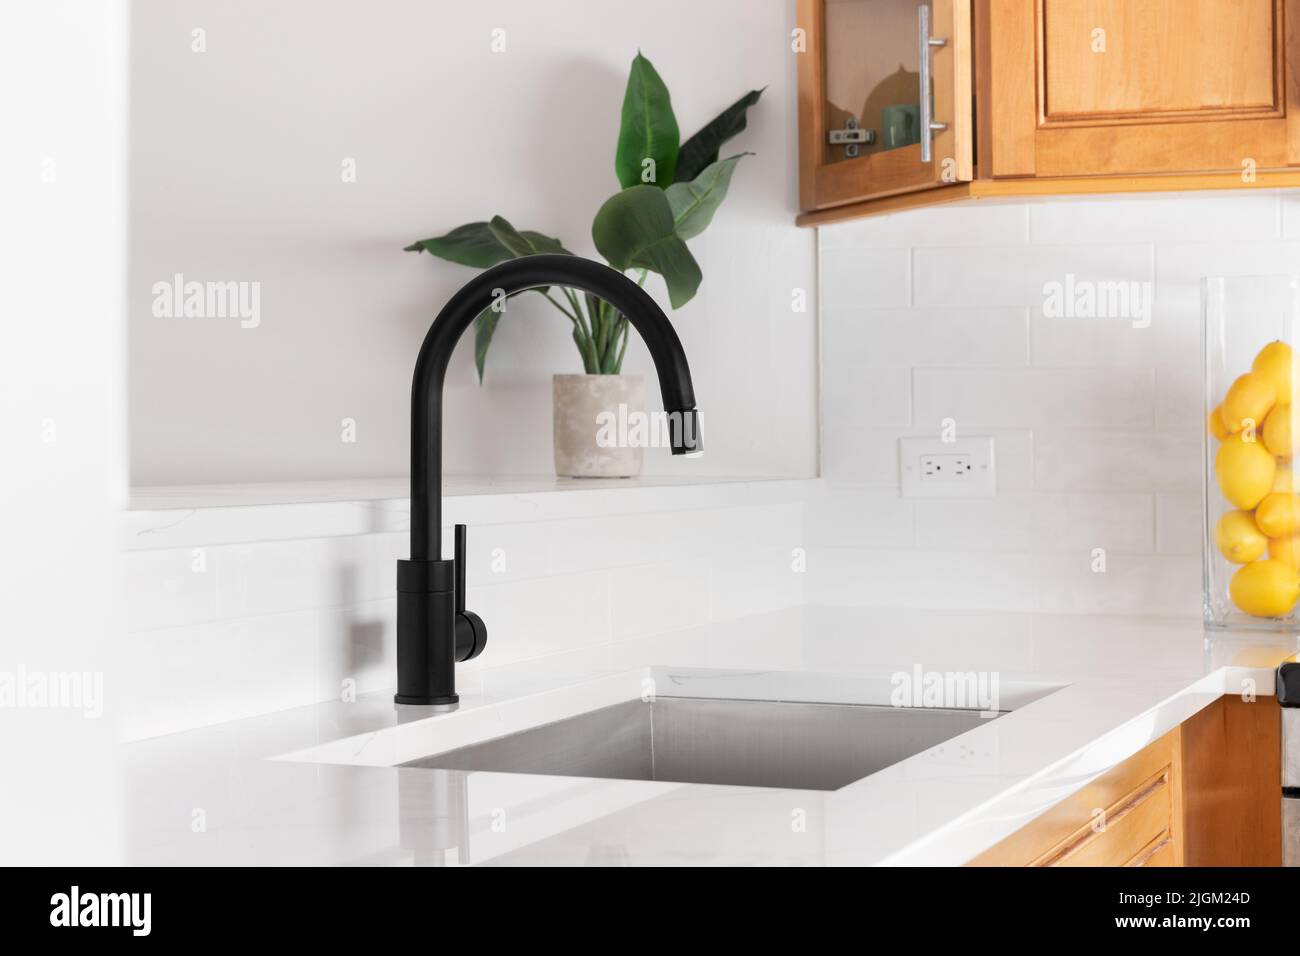 A kitchen sink detail shot with white marble countertop, black faucet, and a wood cabinets. Stock Photo